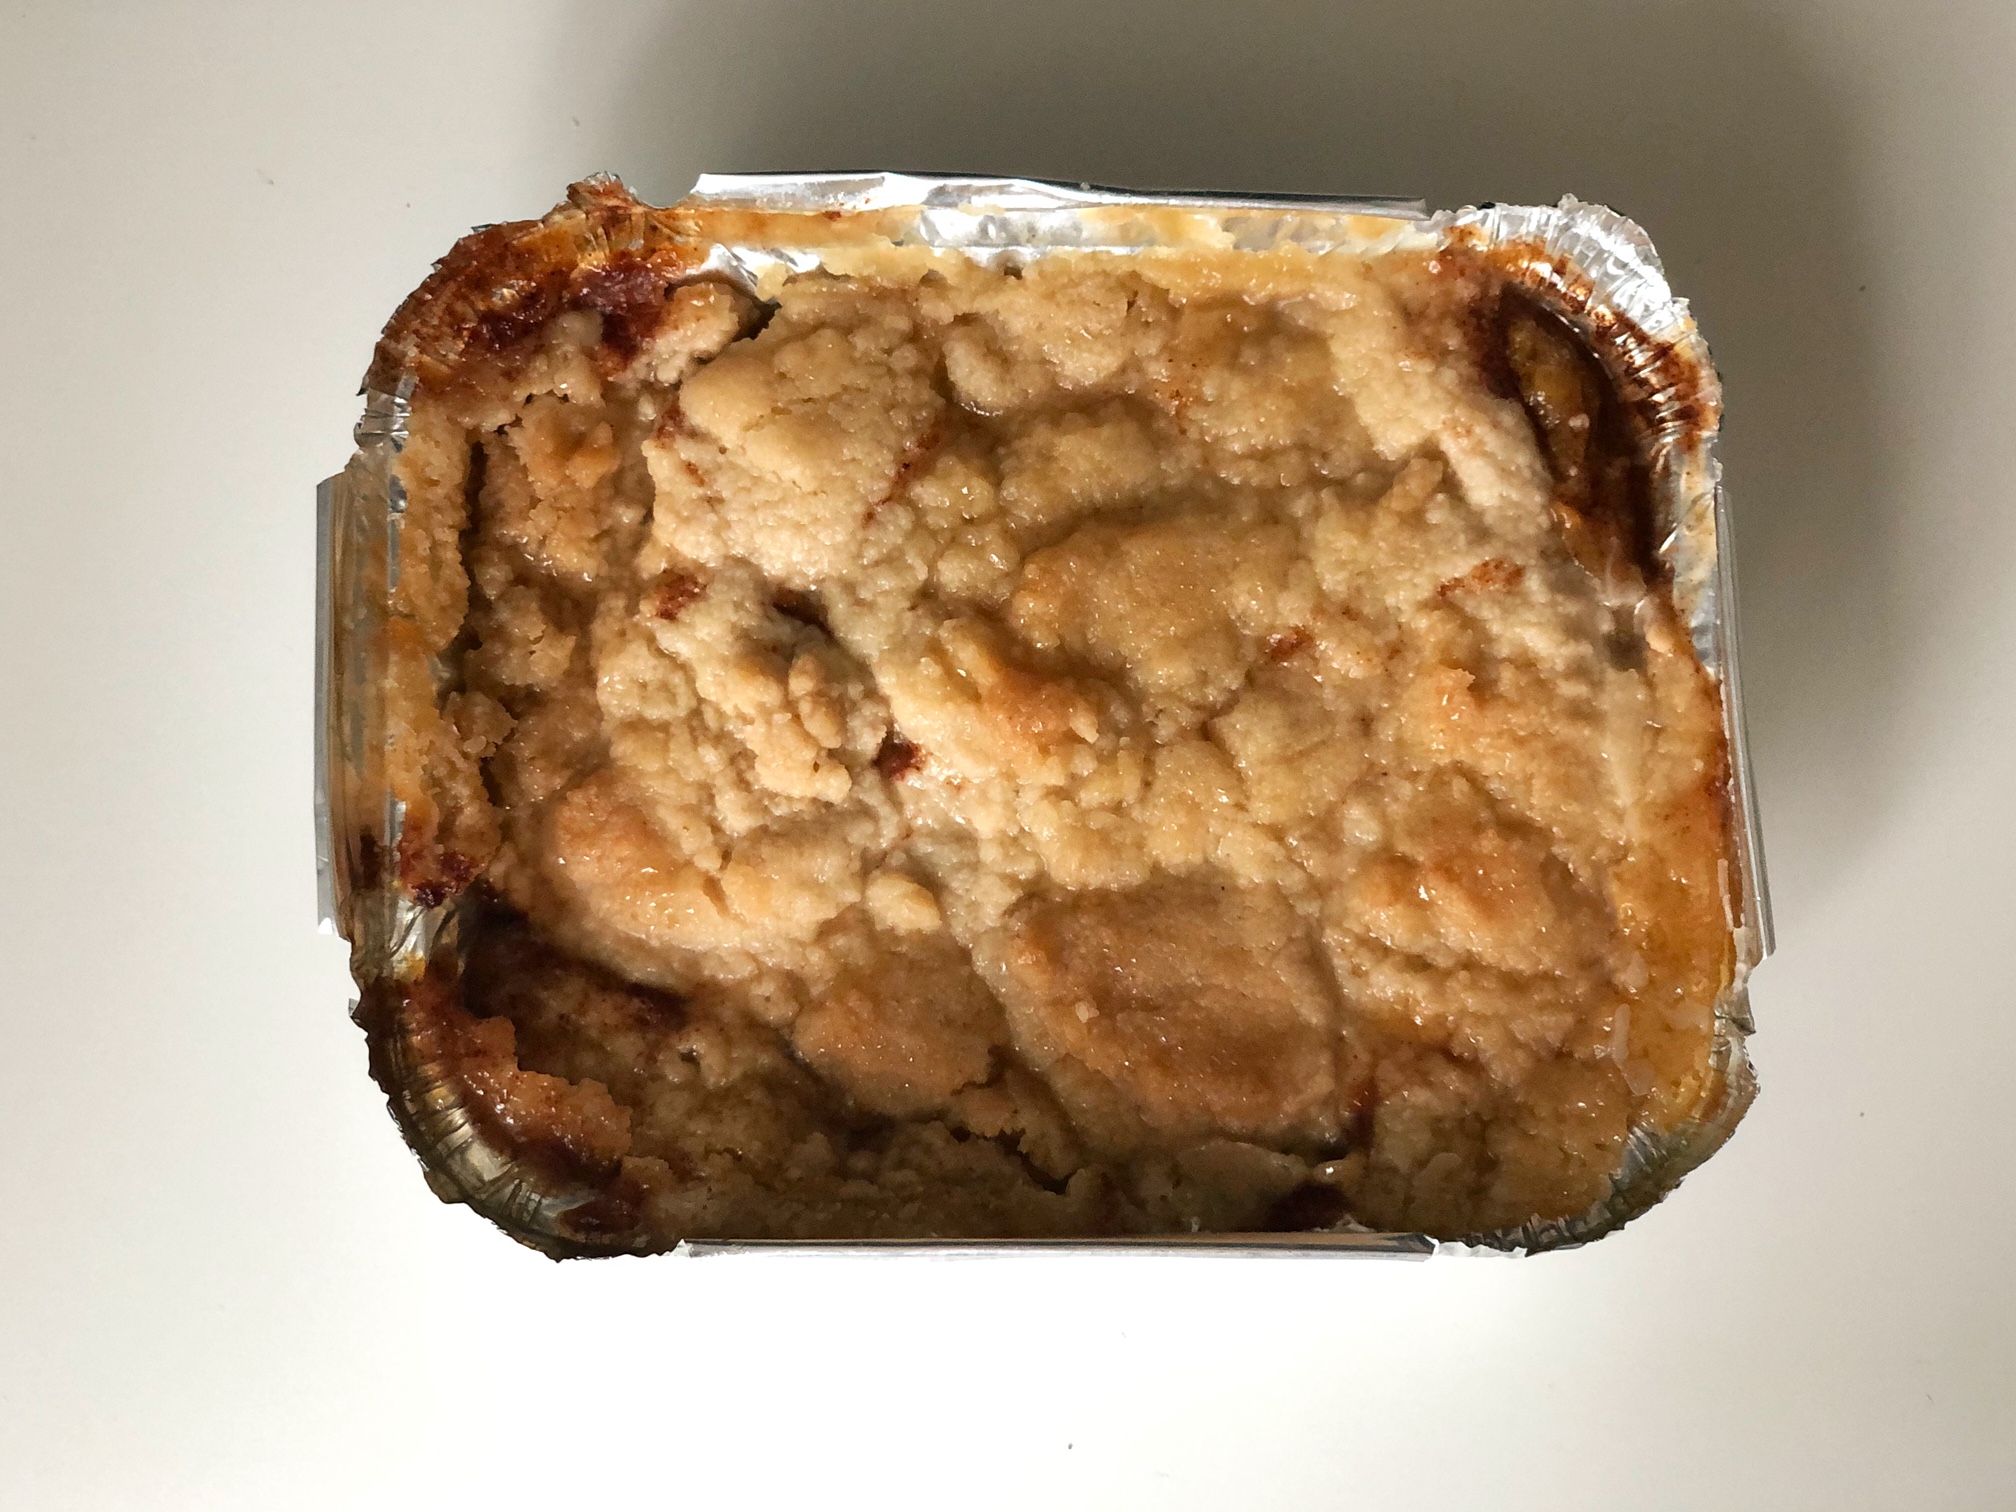 On a white table, a tin foil pan of peach cobbler is fresh from the oven and dark in the corners. Photo by Alyssa Buckley.